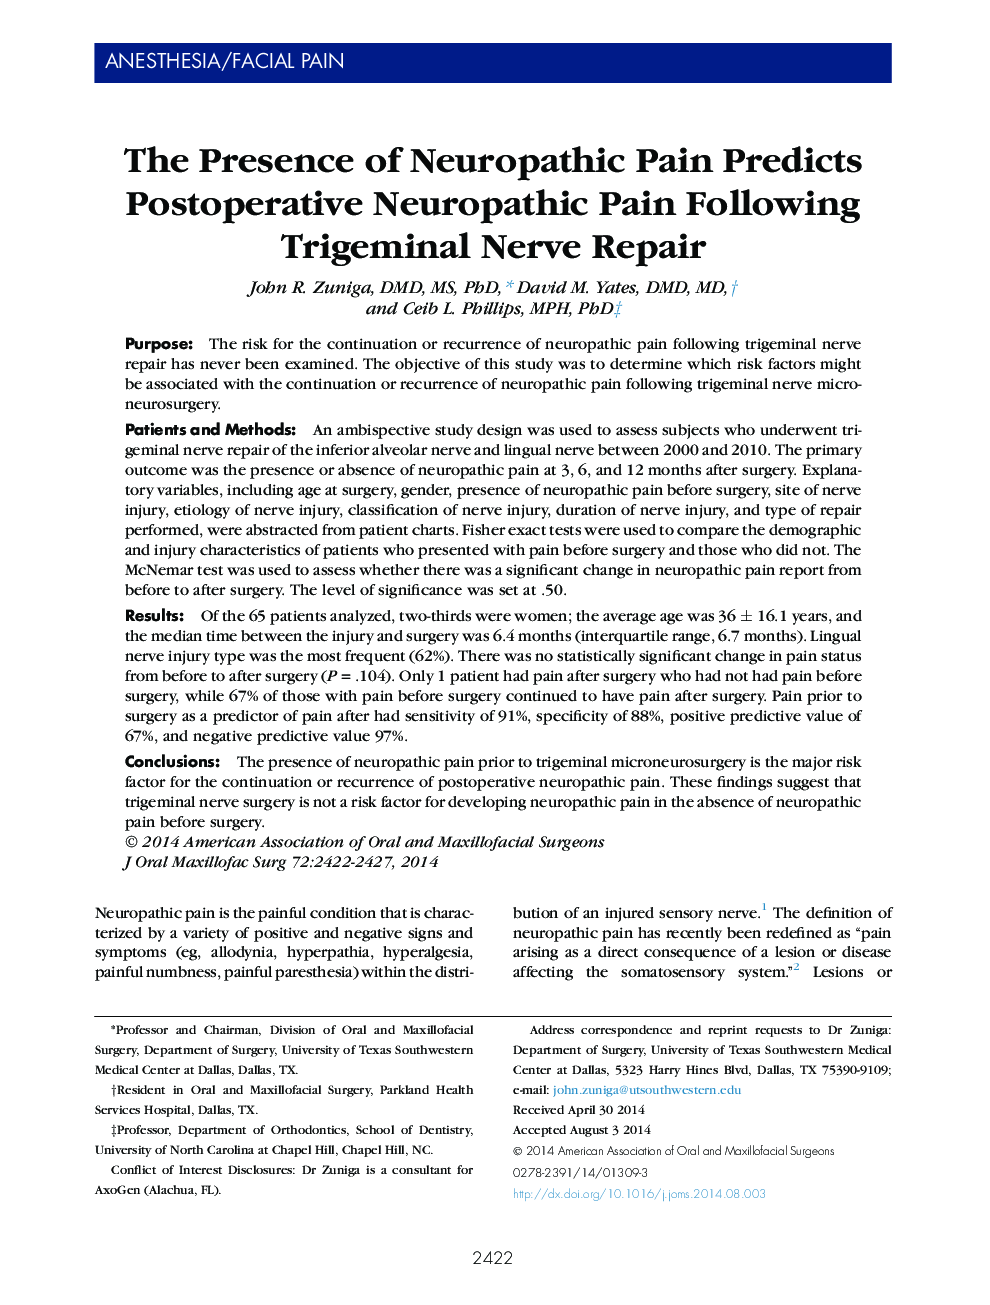 The Presence of Neuropathic Pain Predicts Postoperative Neuropathic Pain Following Trigeminal Nerve Repair 